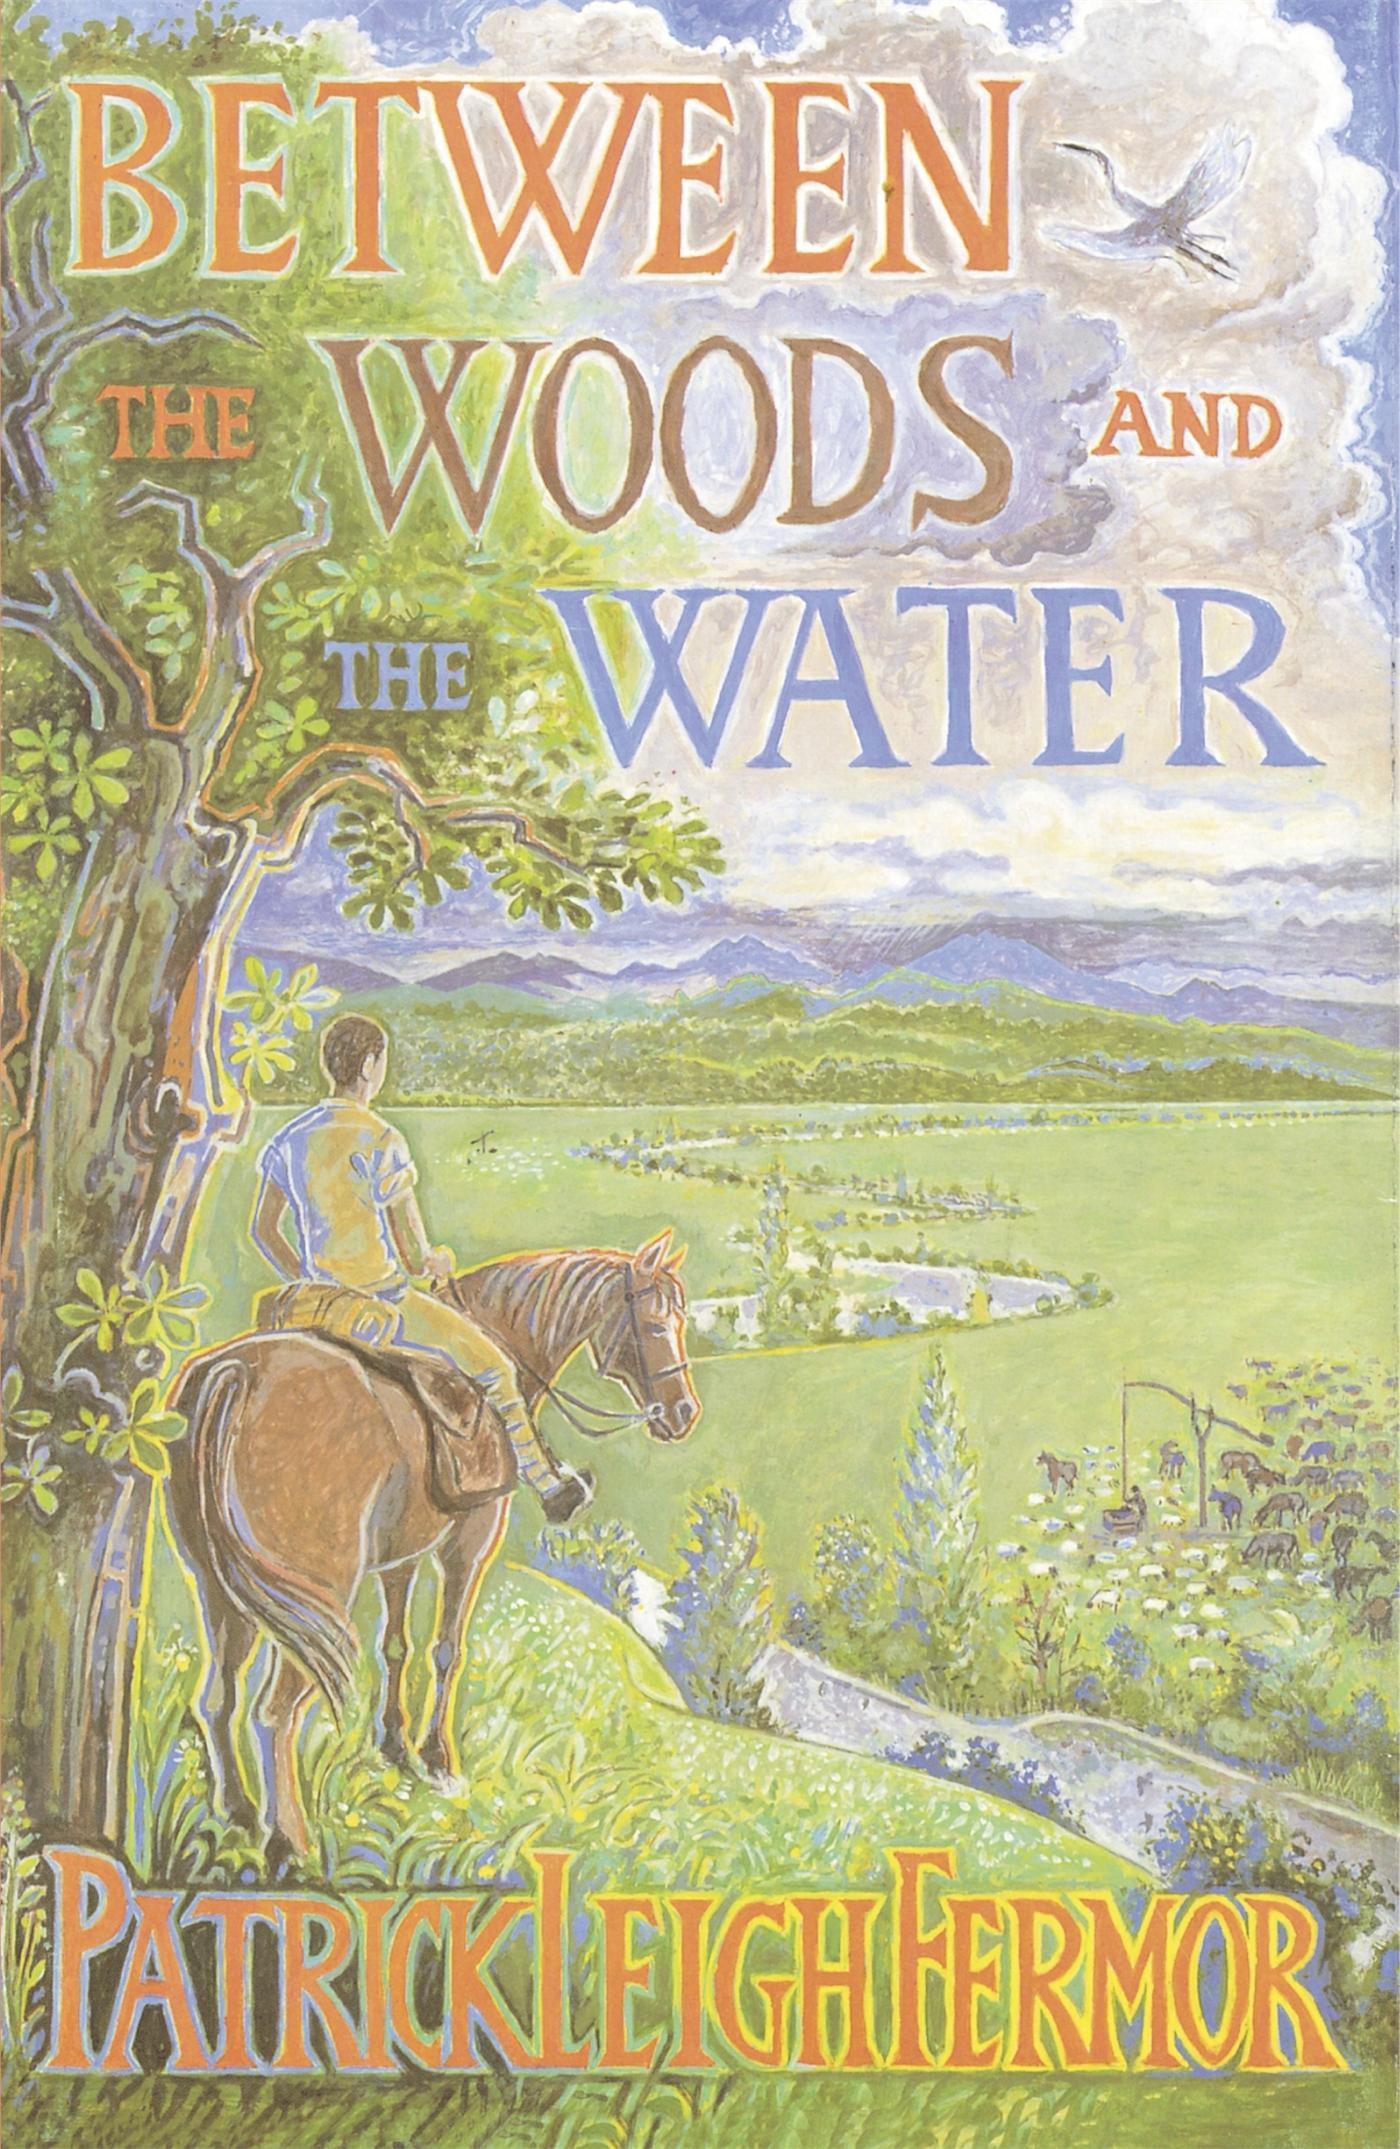 Between the Woods and the Water - Fermor, Patrick Leigh